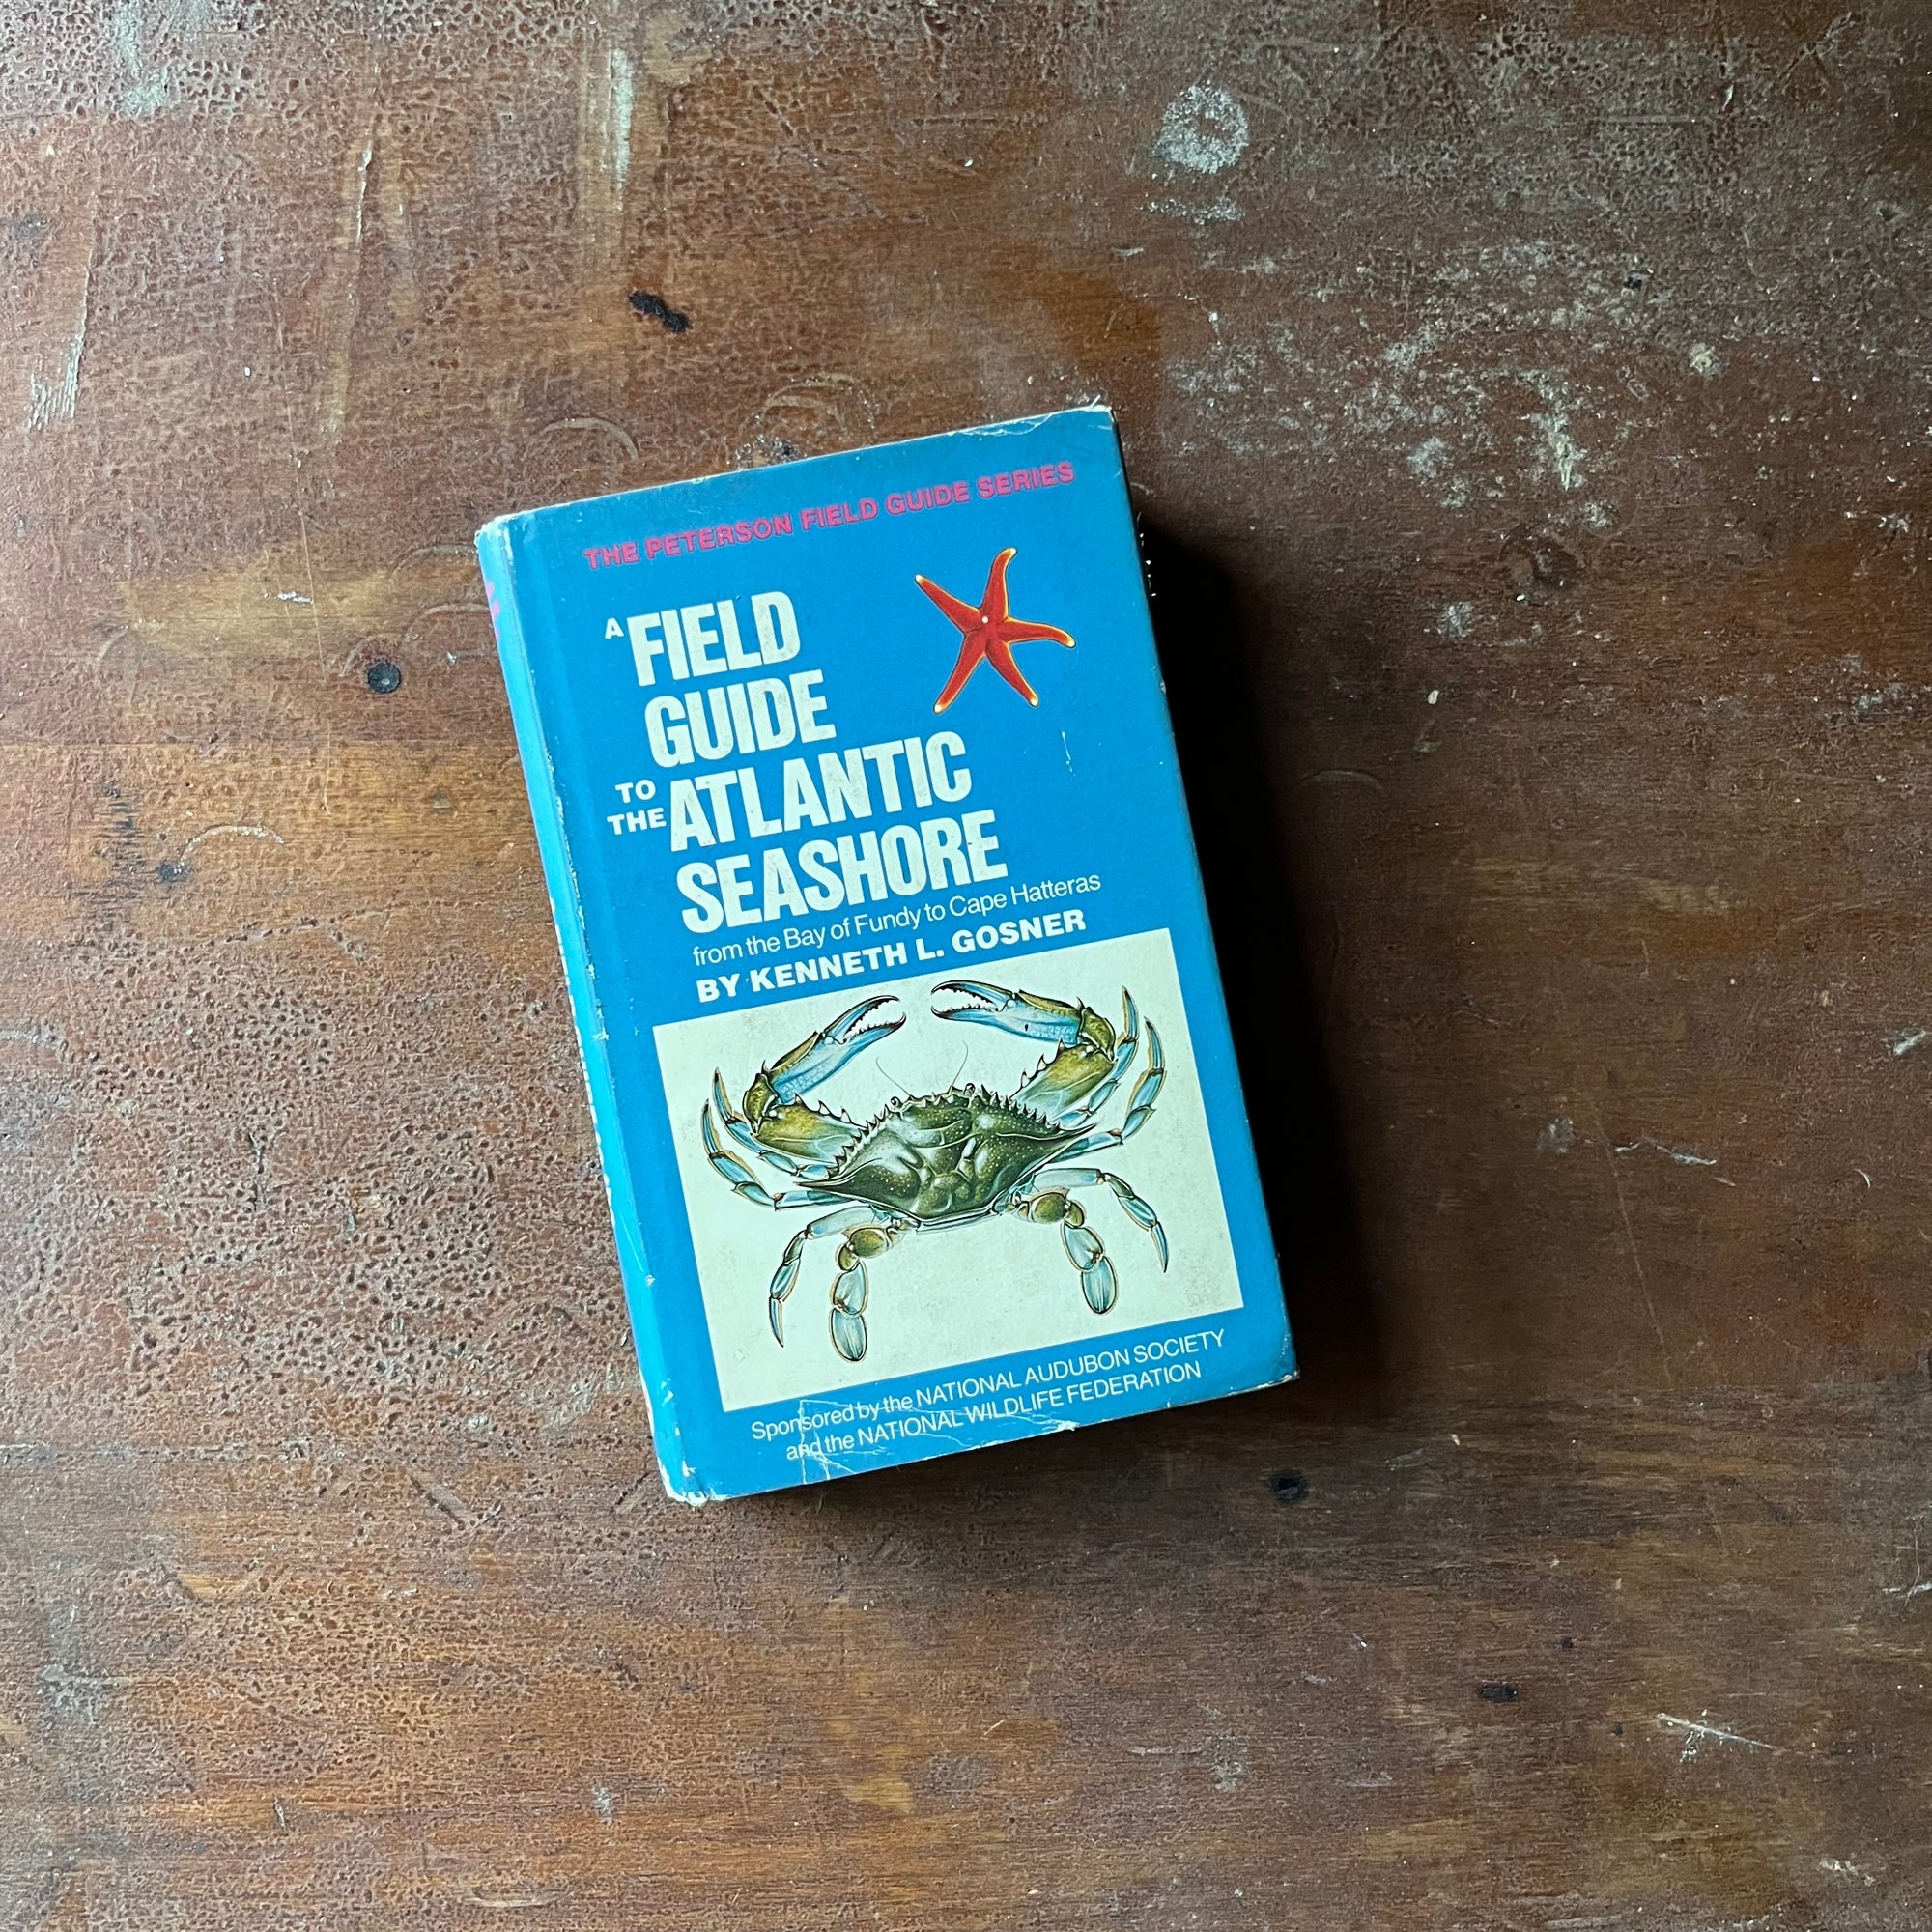 vintage nature guide, Peterson Field Guide-Field Guide to the Atlantic Seashore - view of the dust jacket's front cover